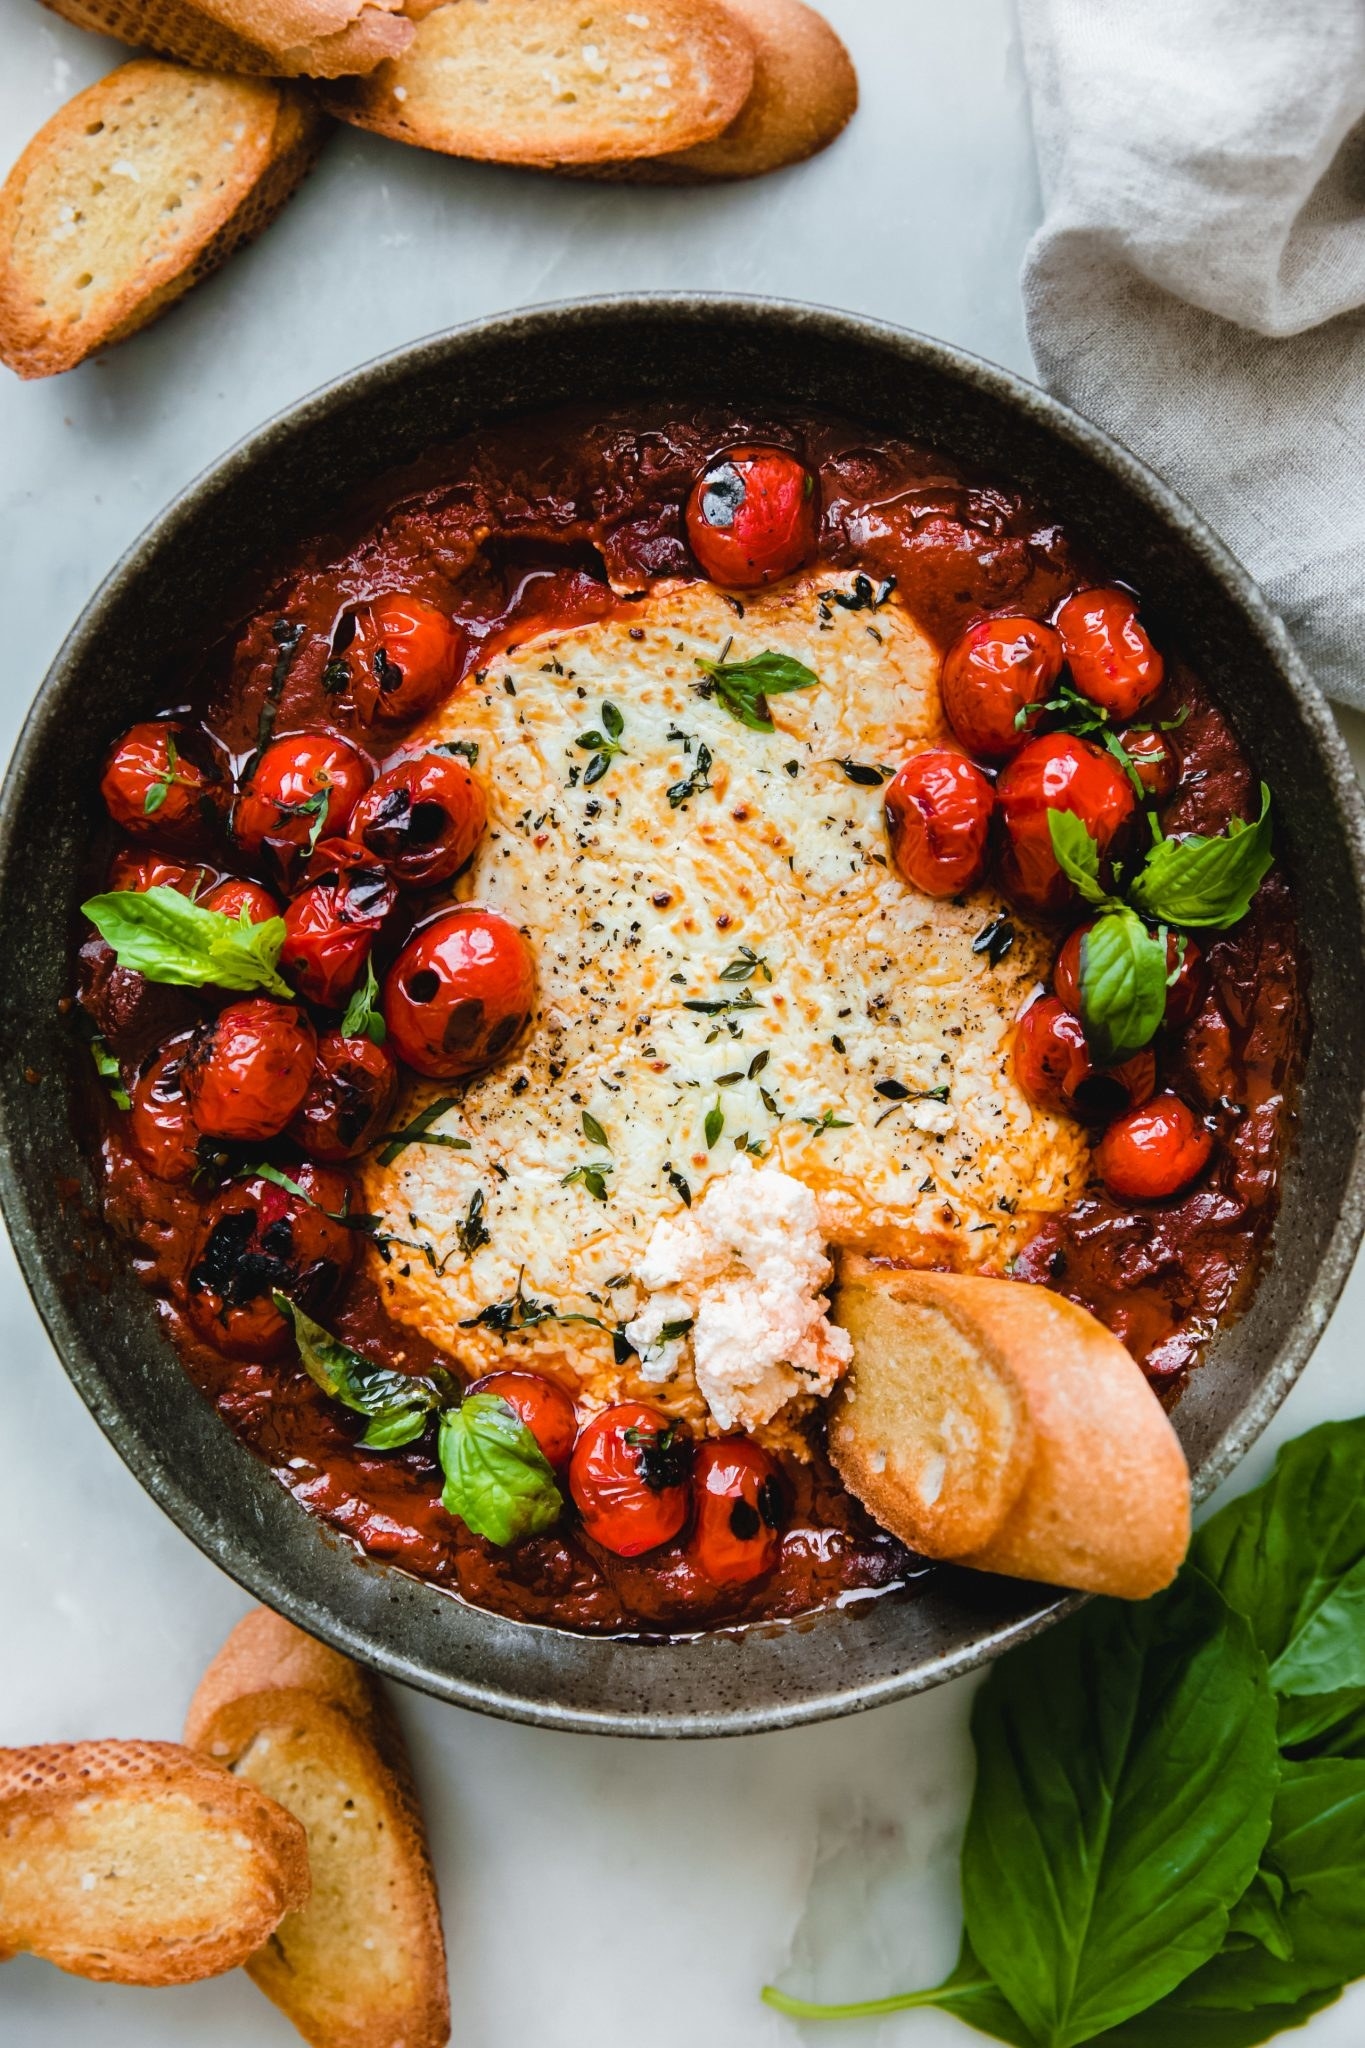 Jammy tomato dip with goat cheese and bread